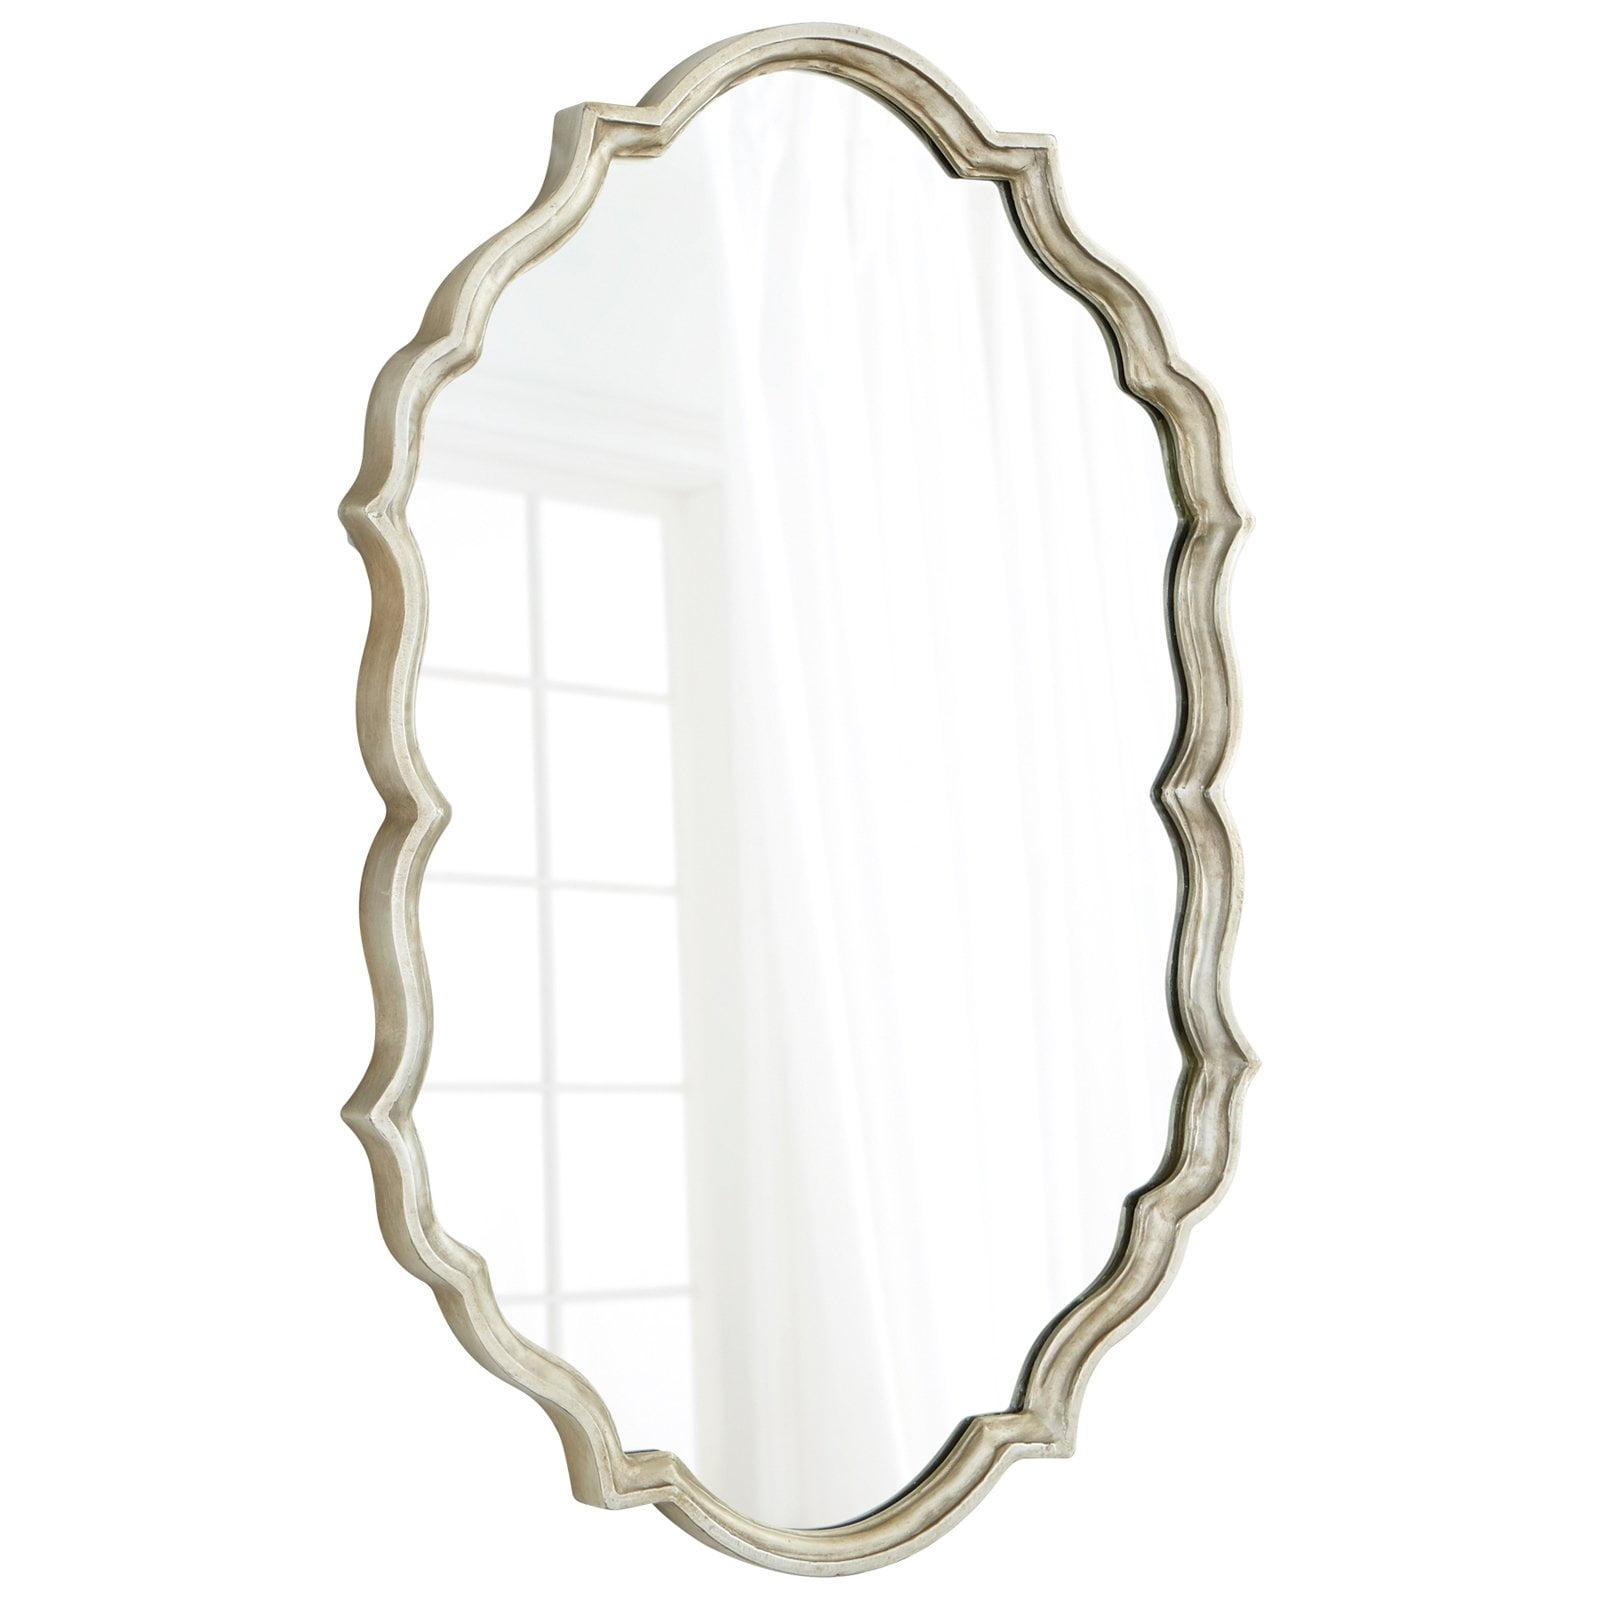 Scalloped Edge Silver and Wood Kids Mirror 28.5" x 40.5"